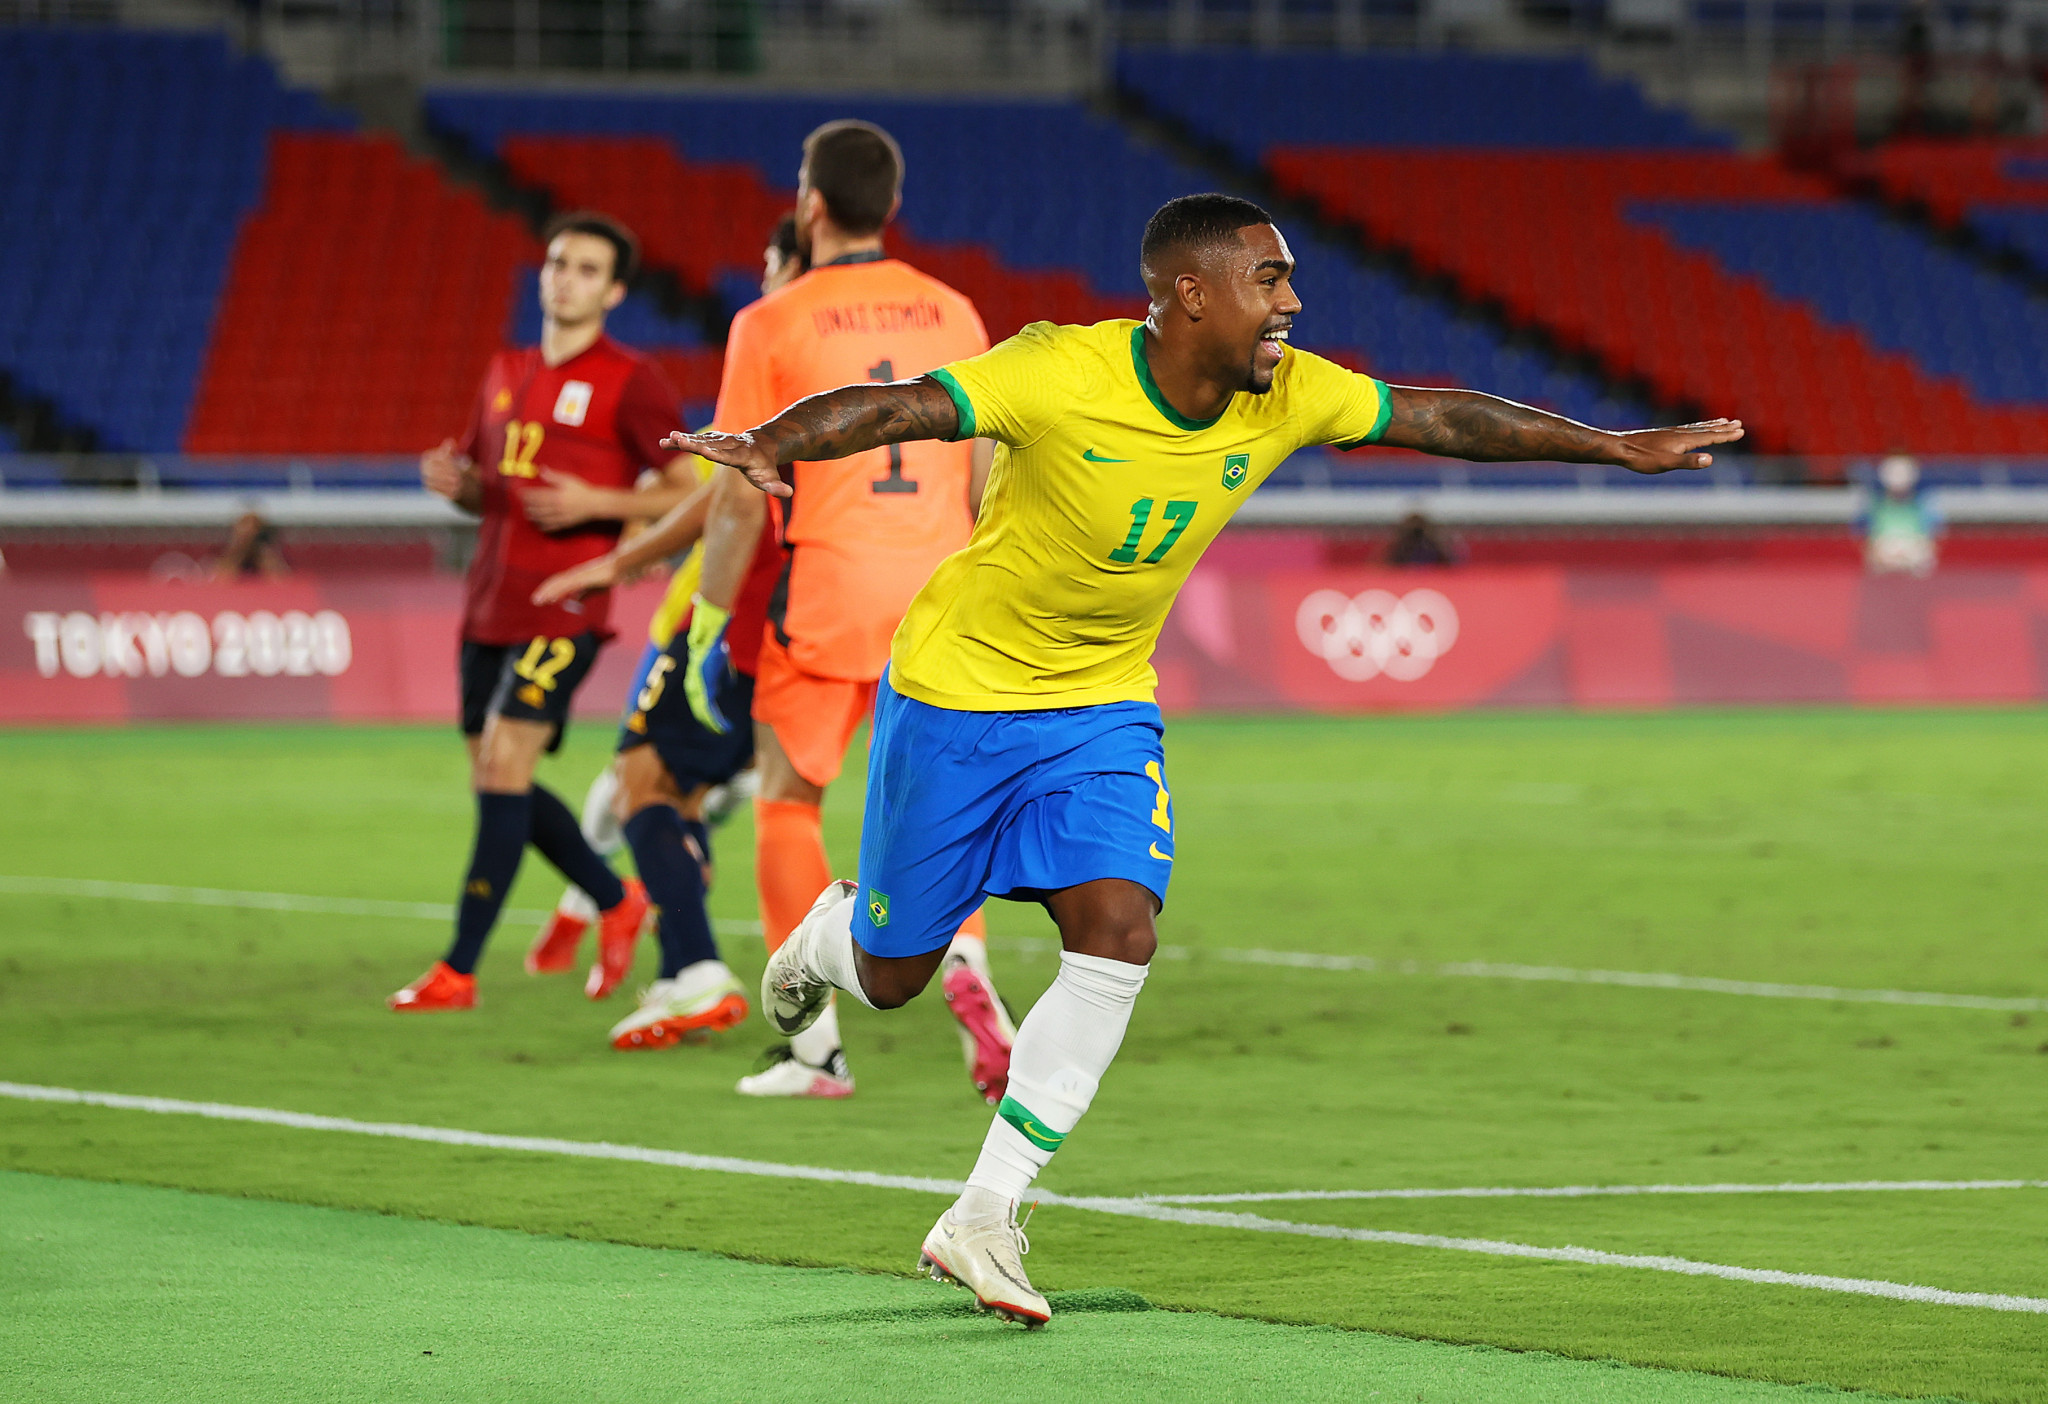 Malcom scores extra time winner as Brazil edge Spain to defend men's Olympic football title